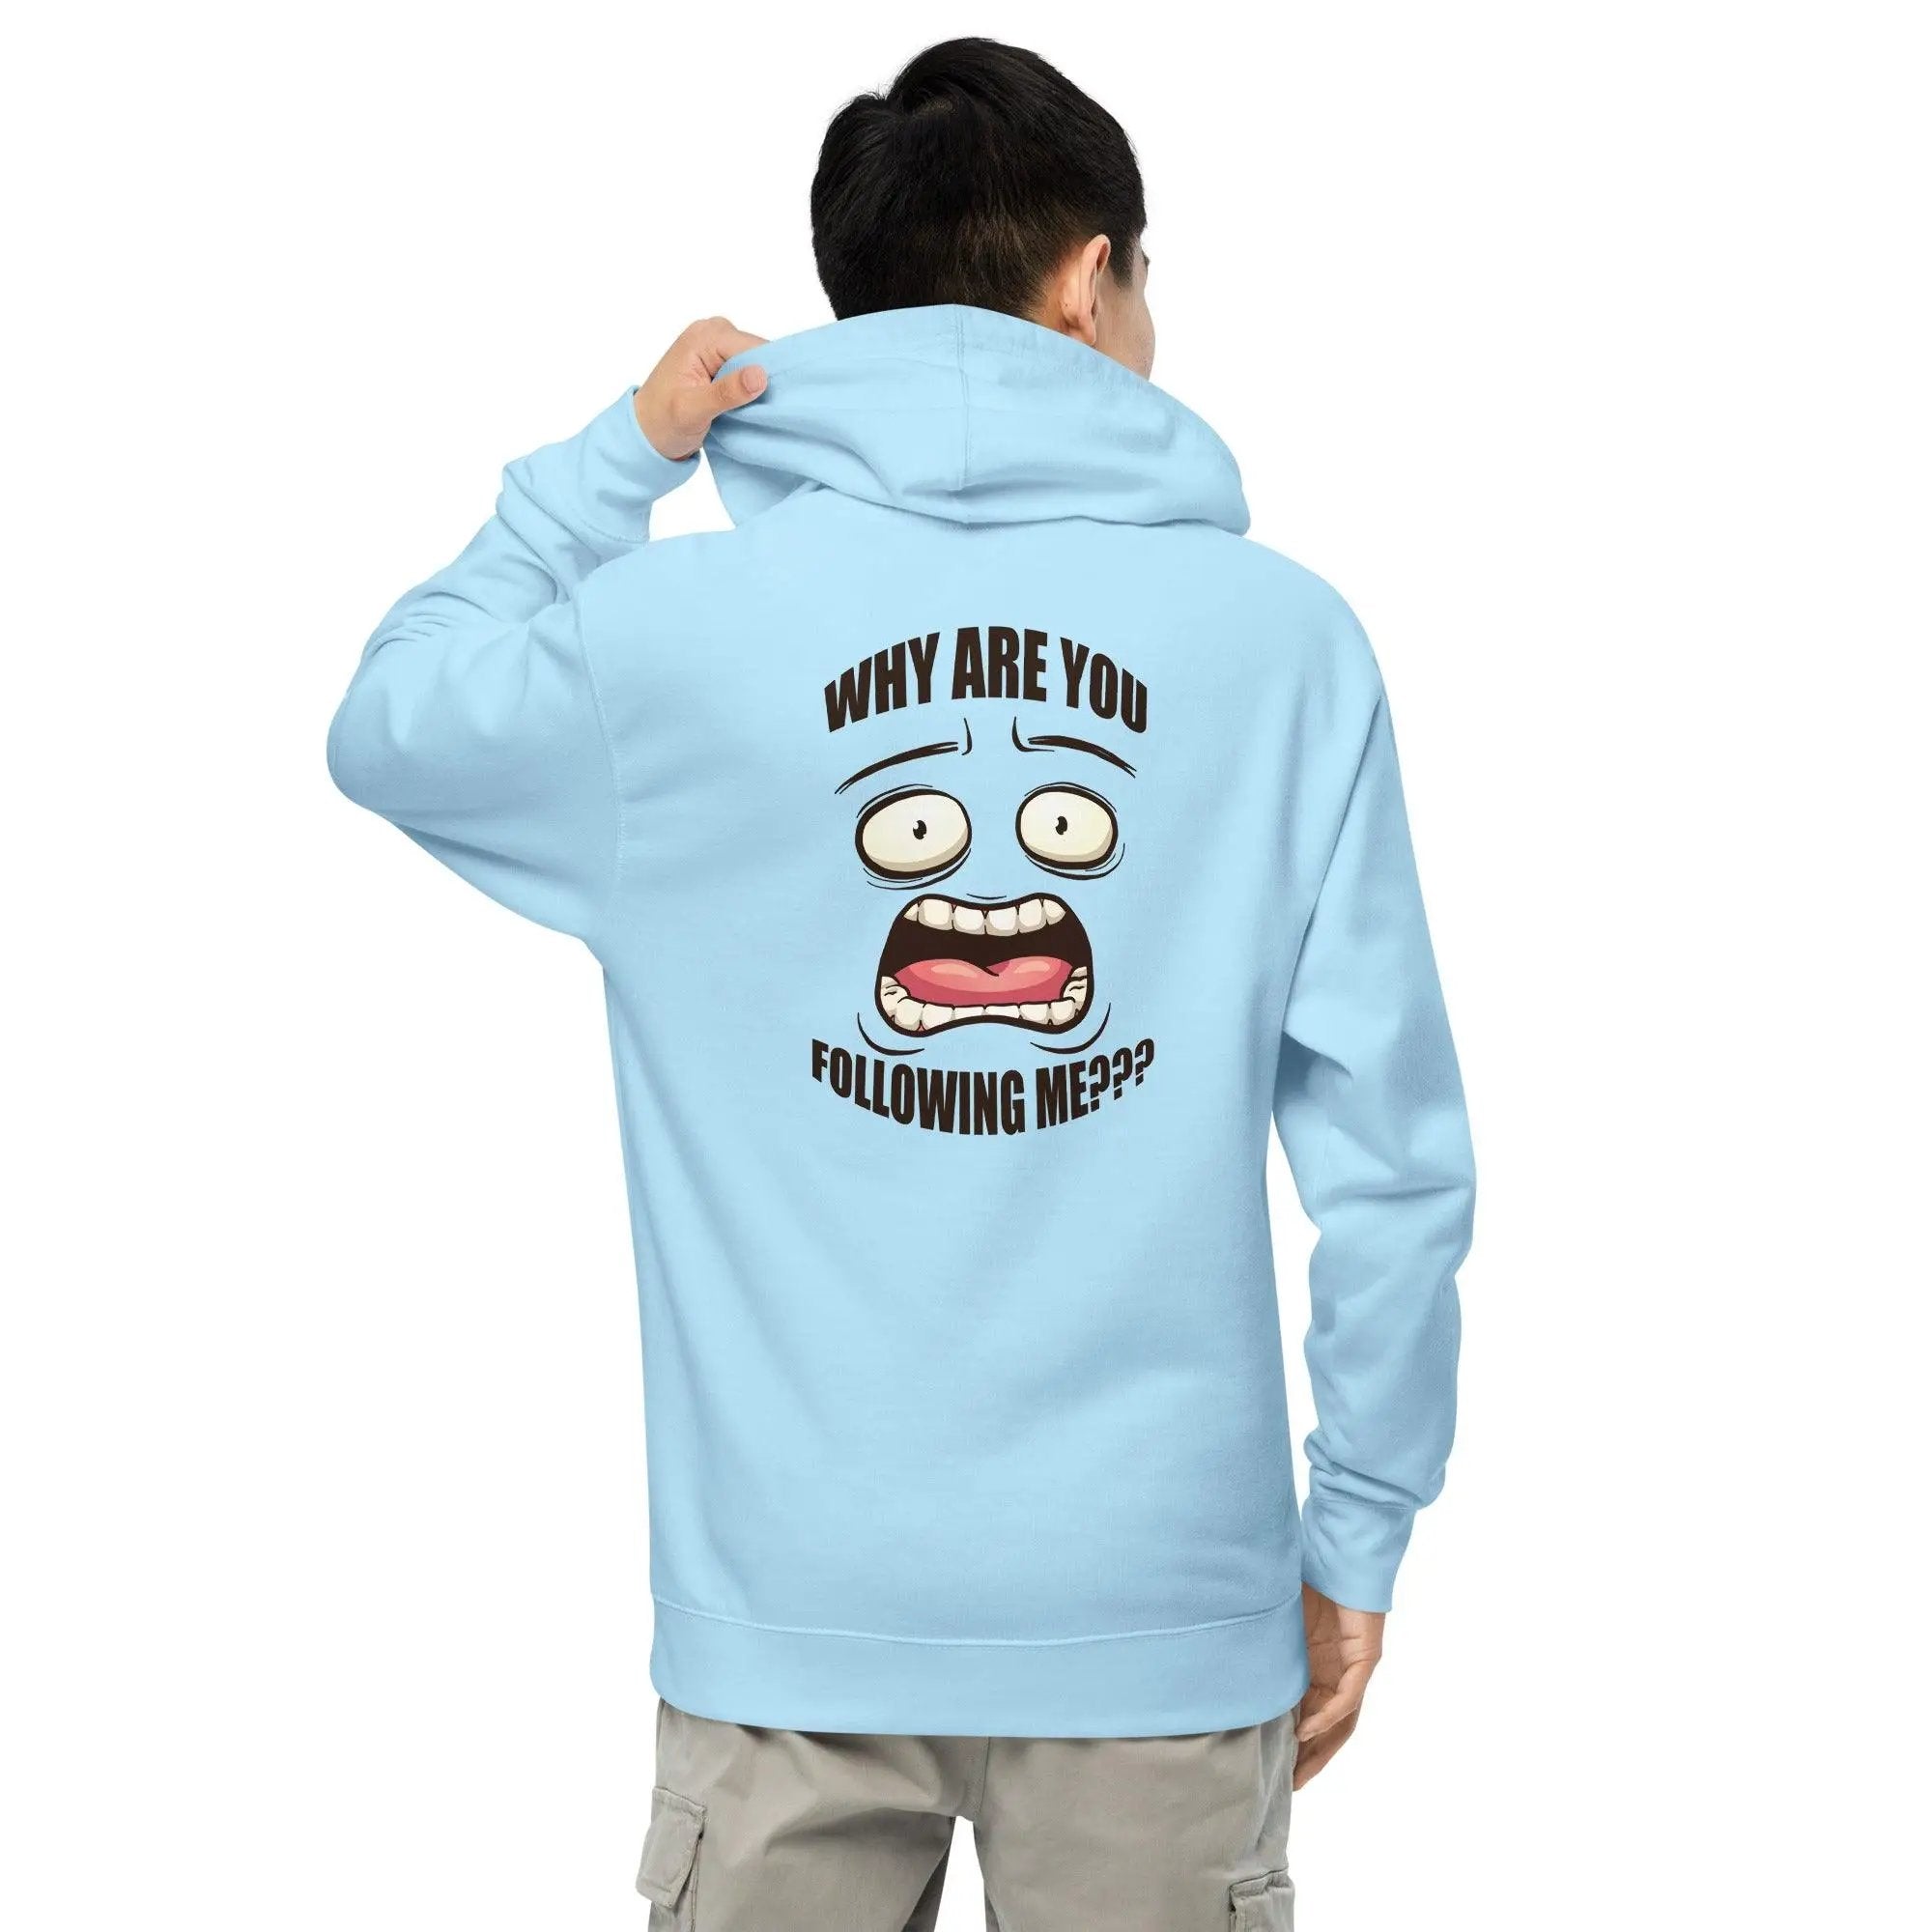 Why Are You Following Me? Unisex midweight hoodie VAWDesigns